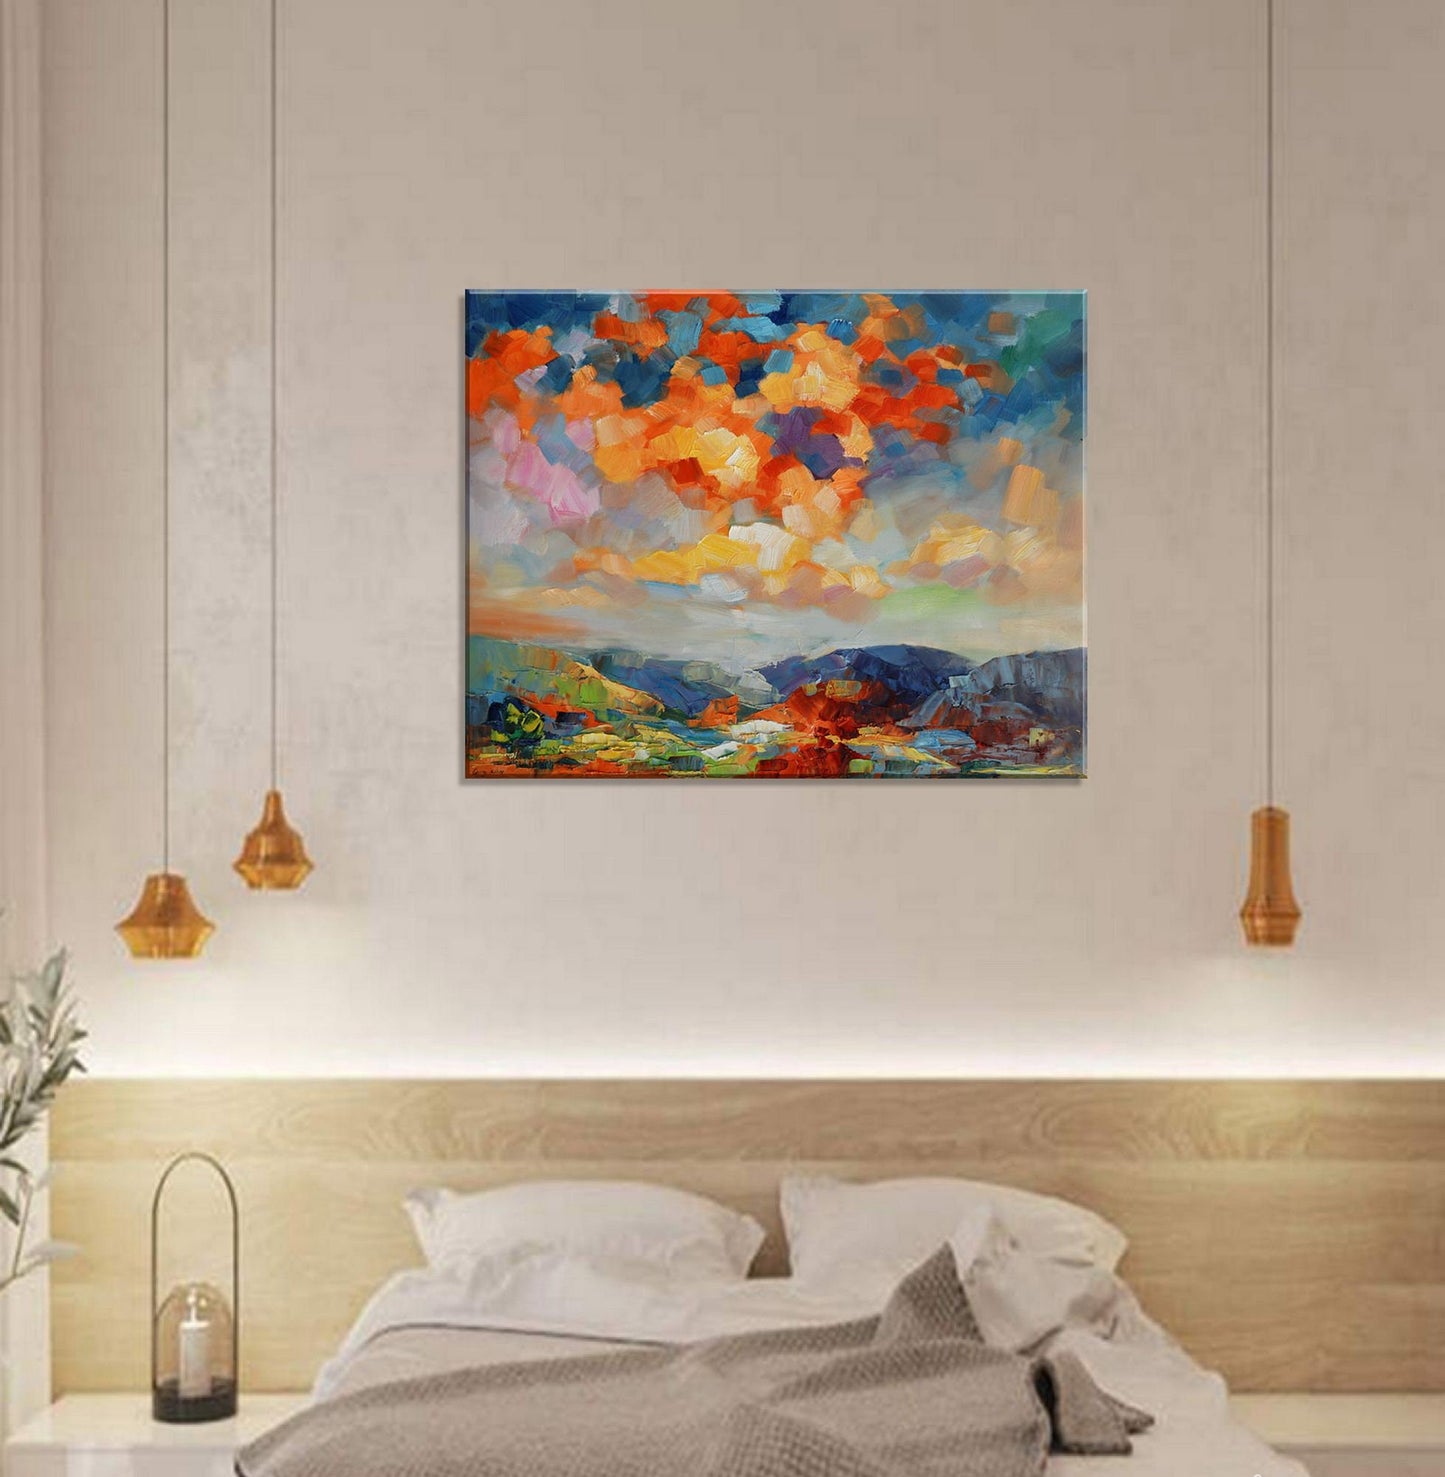 Large Oil Painting Landscape, Abstract Painting, Tuscany Sunset, Contemporary Painting, Original Landscape Painting, Abstract Art Wall Decor